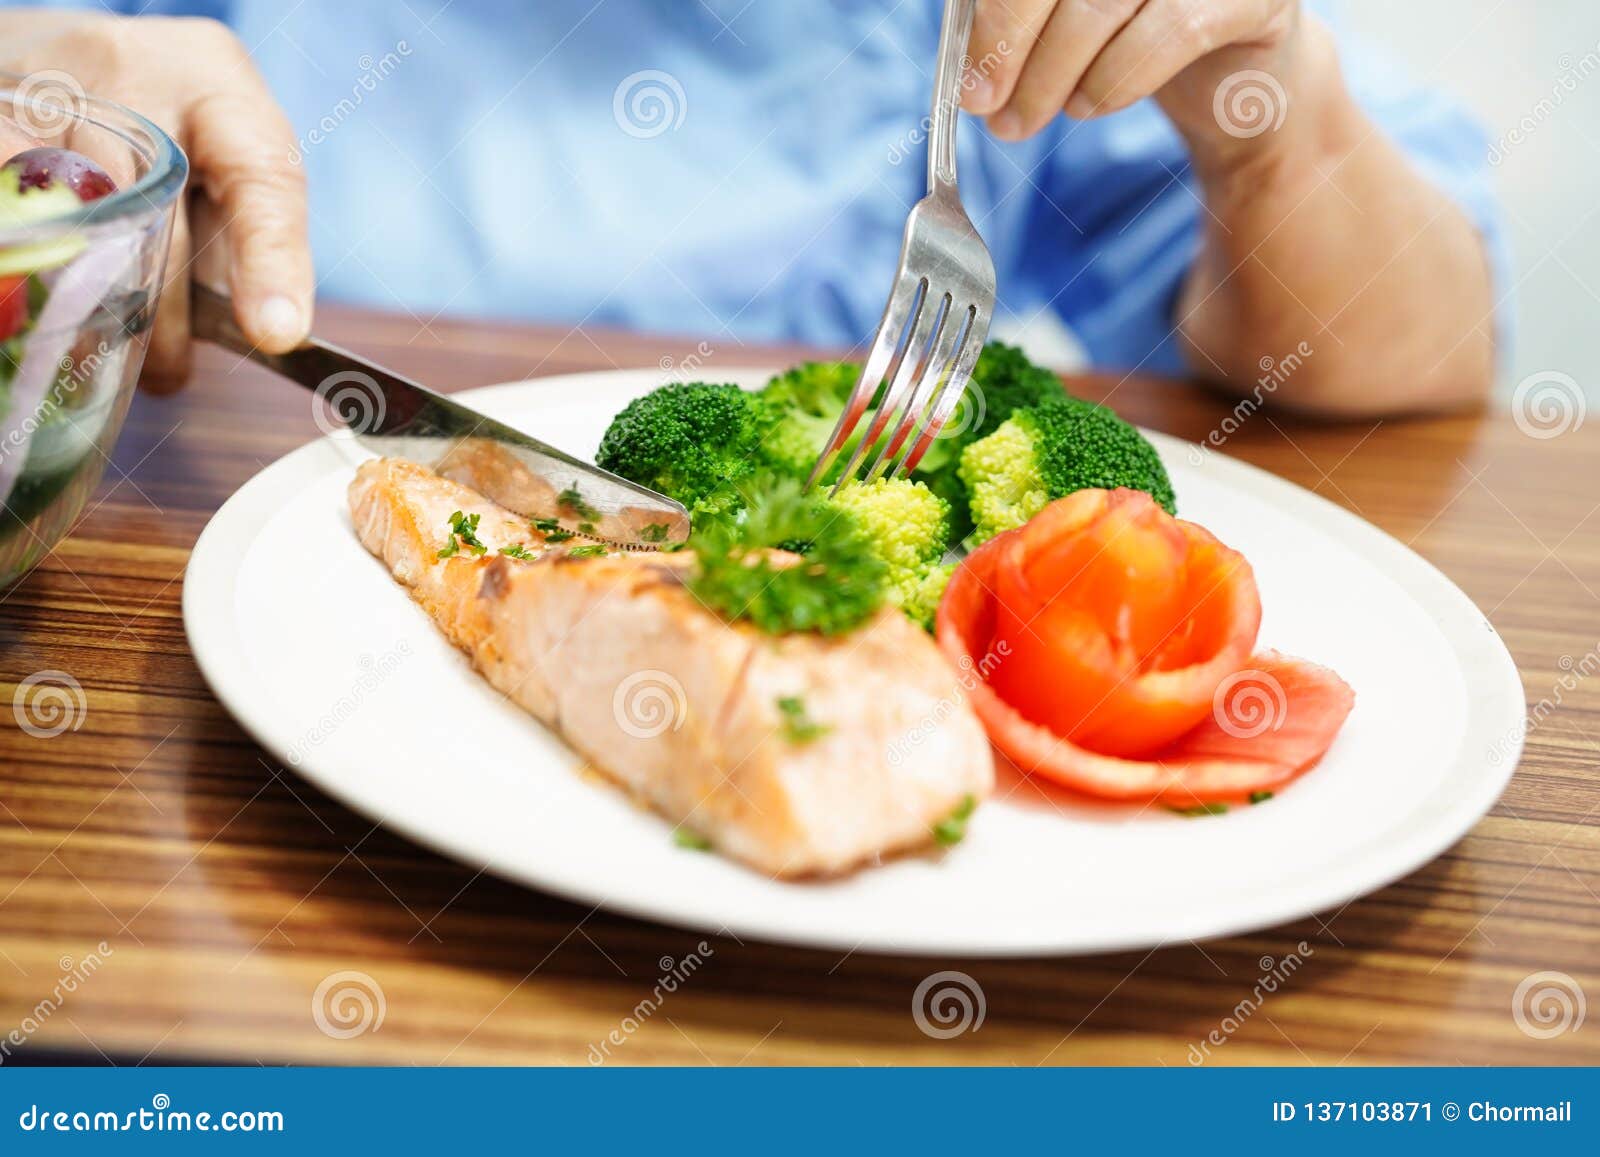 Asian Senior Old Lady Woman Patient Eating Breakfast Healthy Food in ...